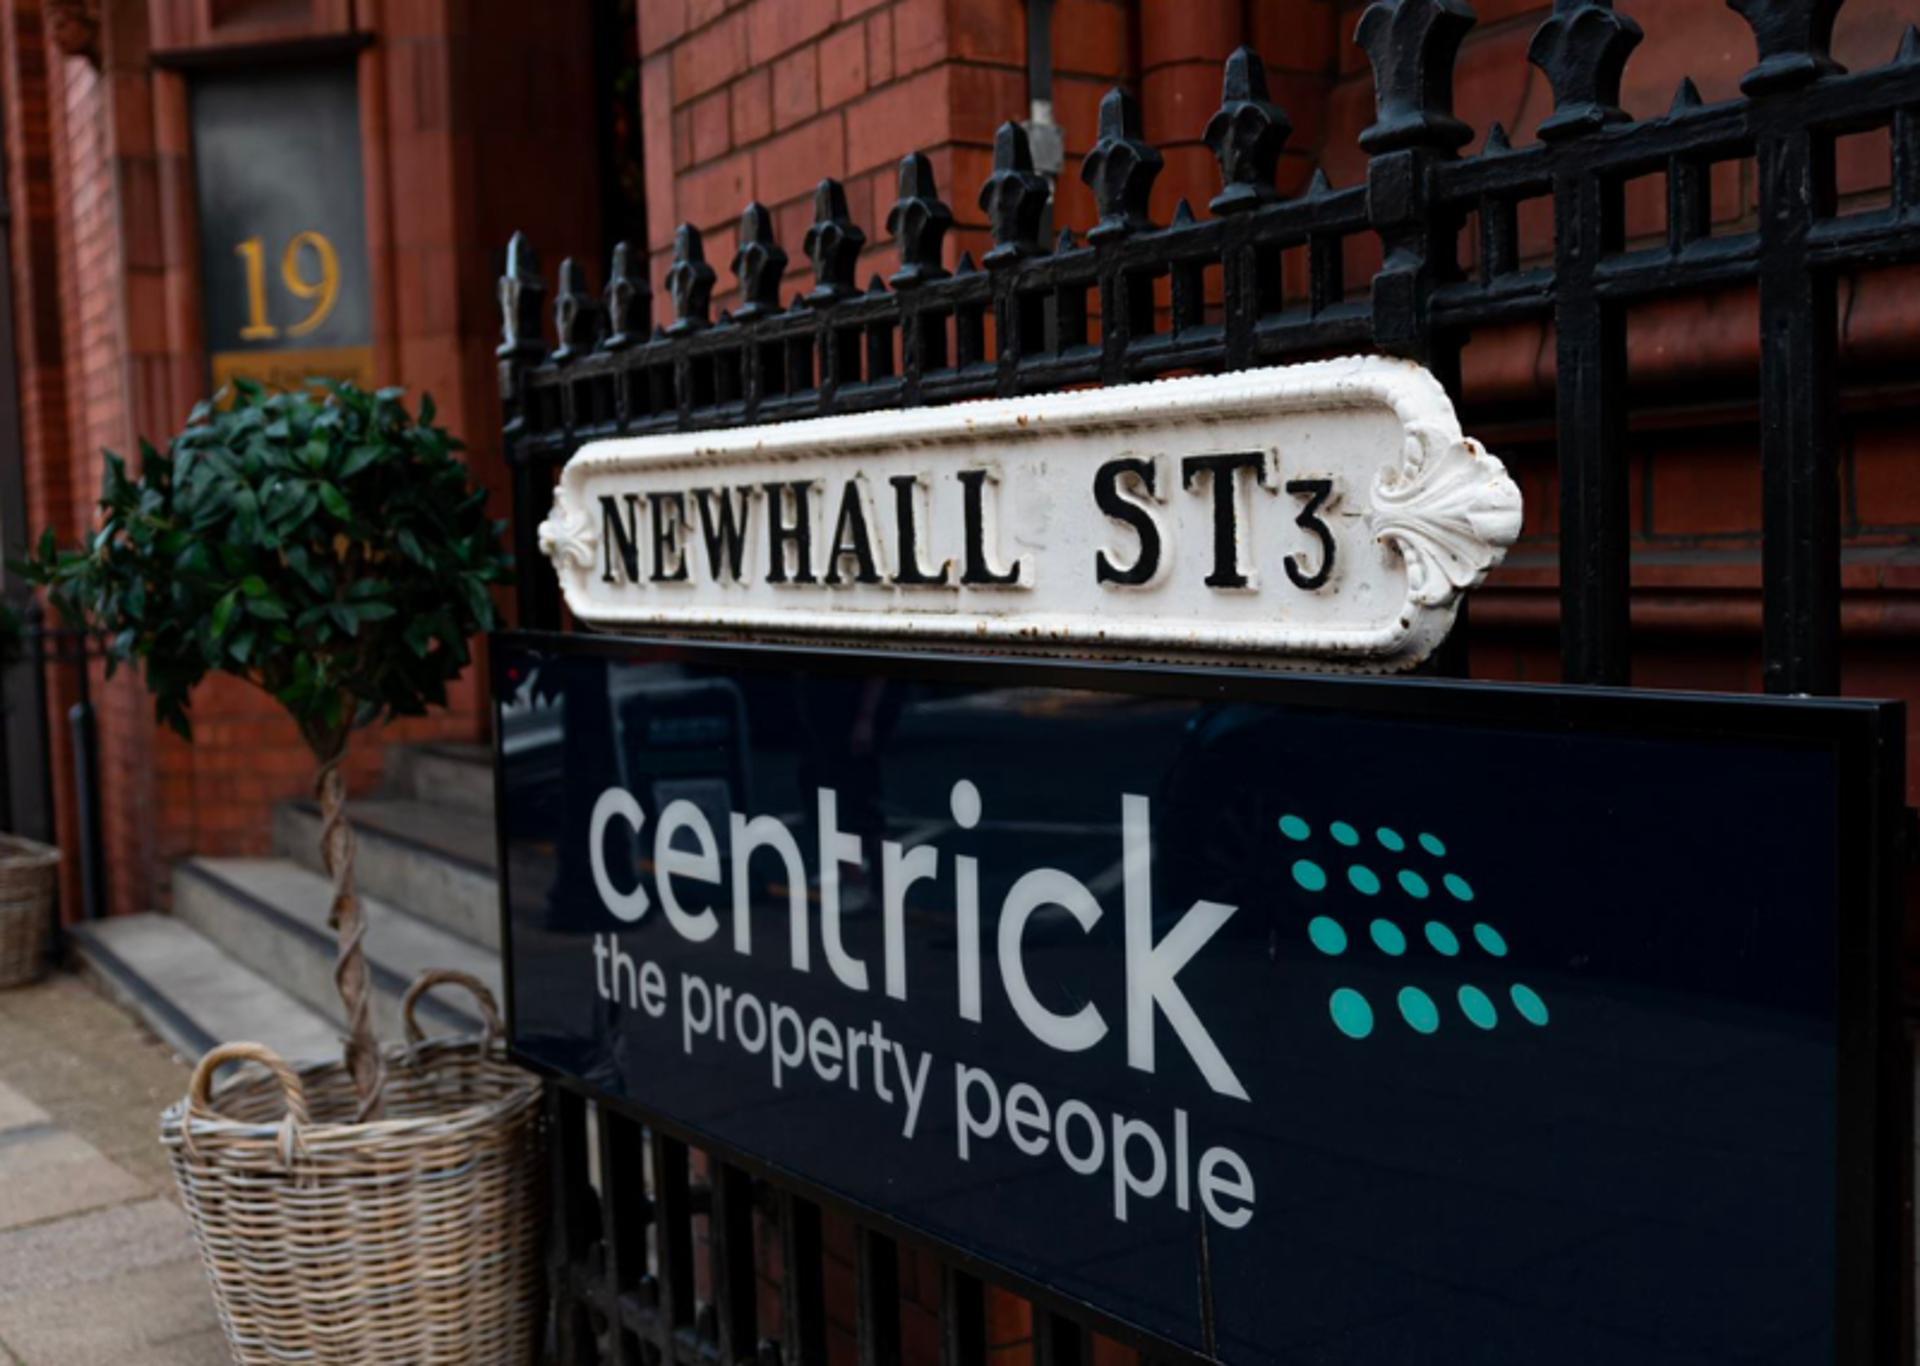 Centrick sells high street division to focus on residential property services